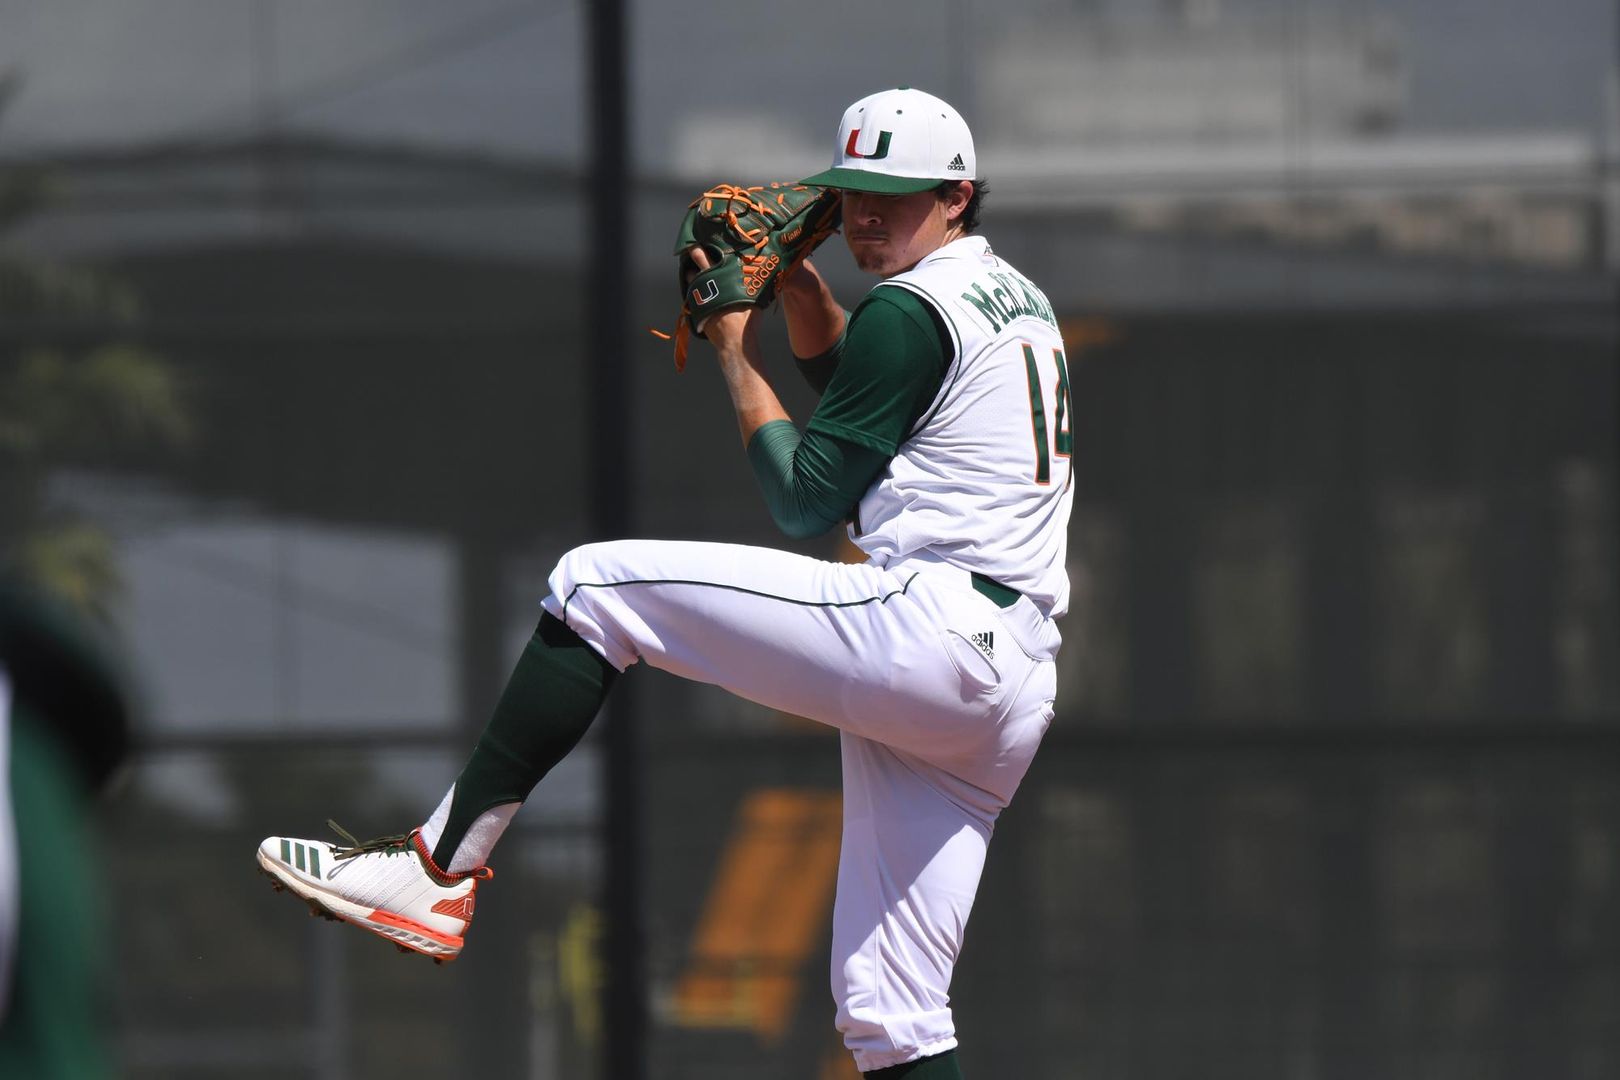 McKendry Selected as ACC Pitcher of the Week